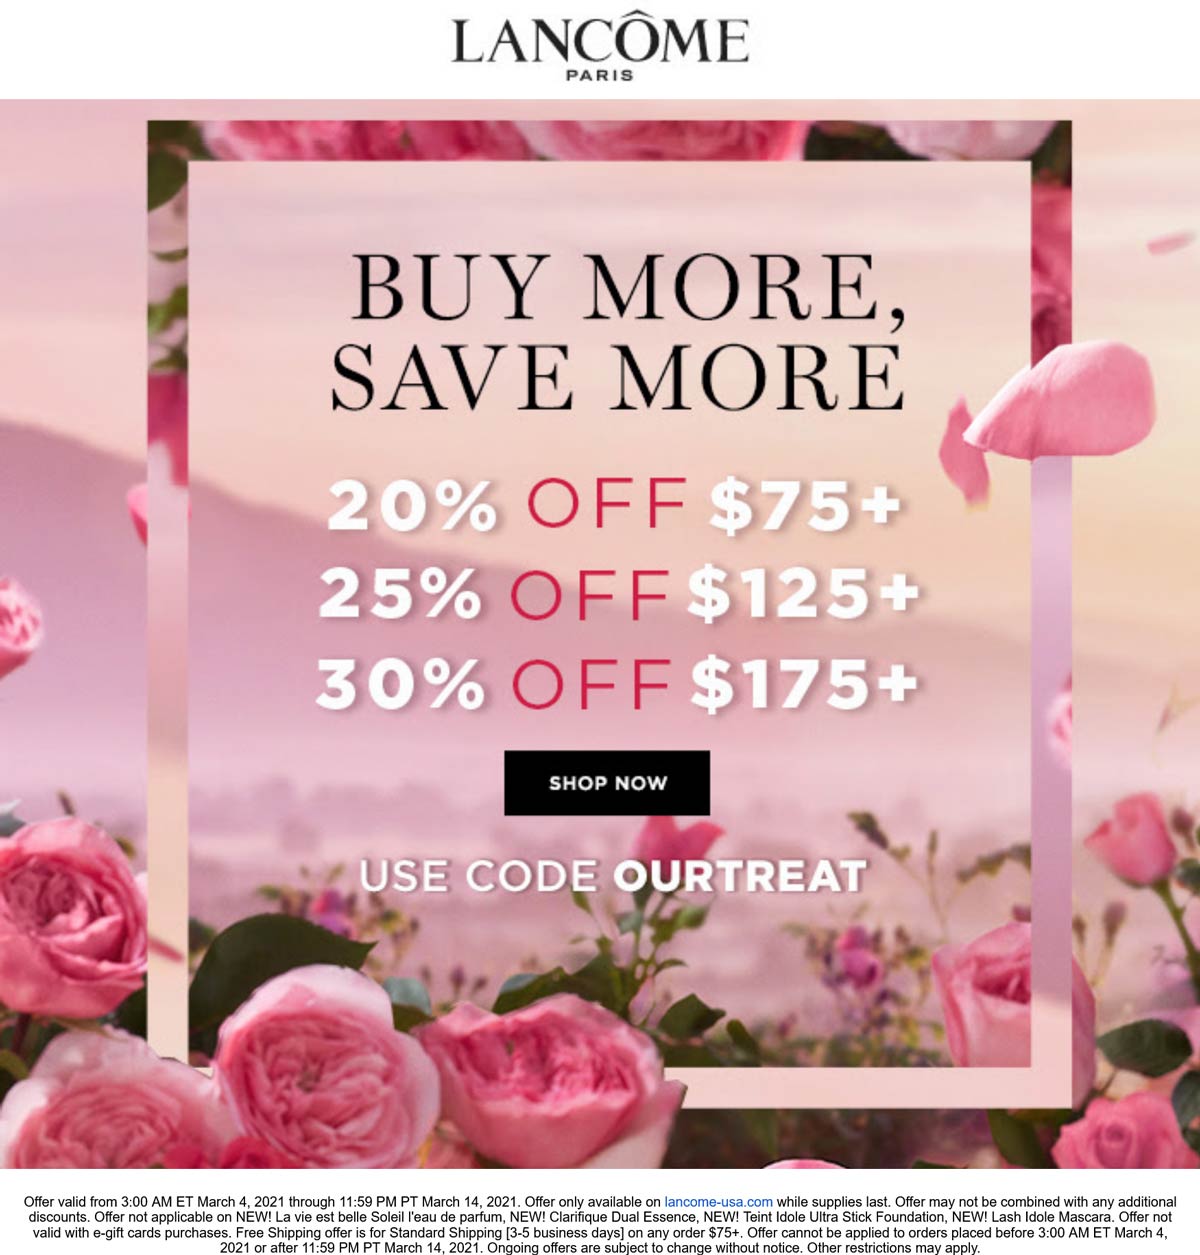 Lancome stores Coupon  20-30% off $75+ at Lancome cosmetics via promo code OURTREAT #lancome 